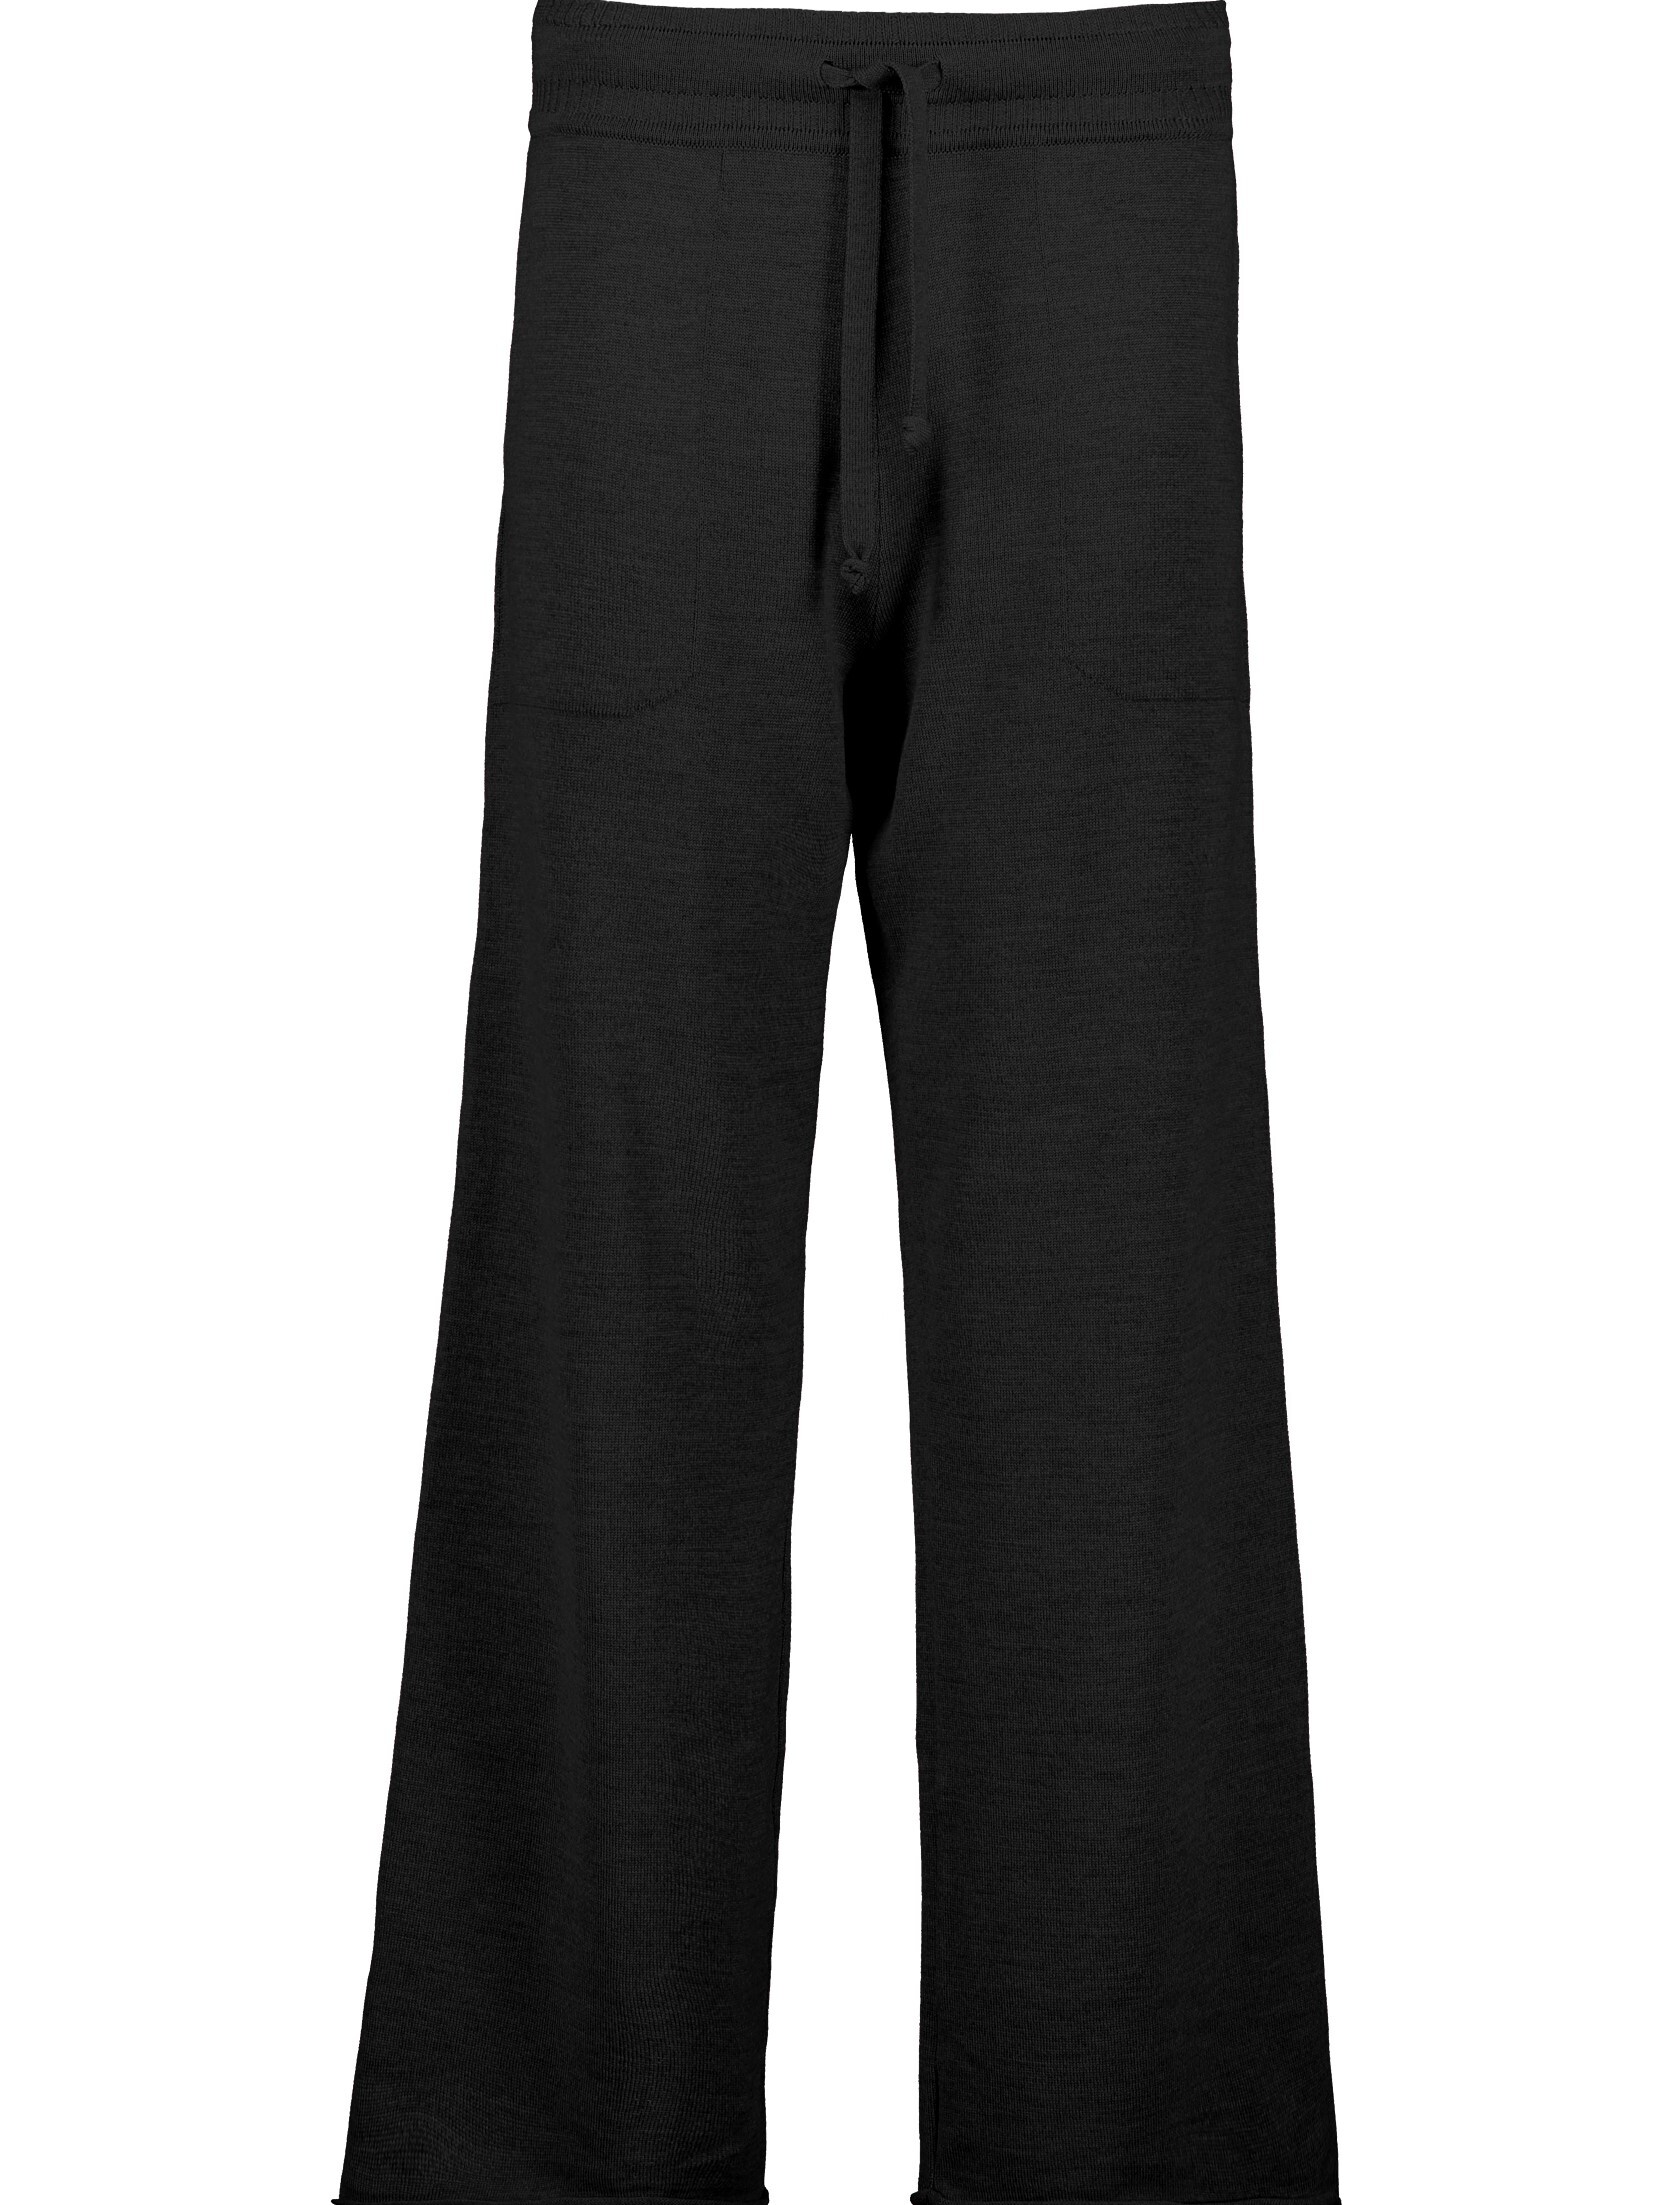 FULL LENGTH PANT (BLACK)- STANDARD ISSUE AUTUMN WINTER 21 Boxing Day Sale